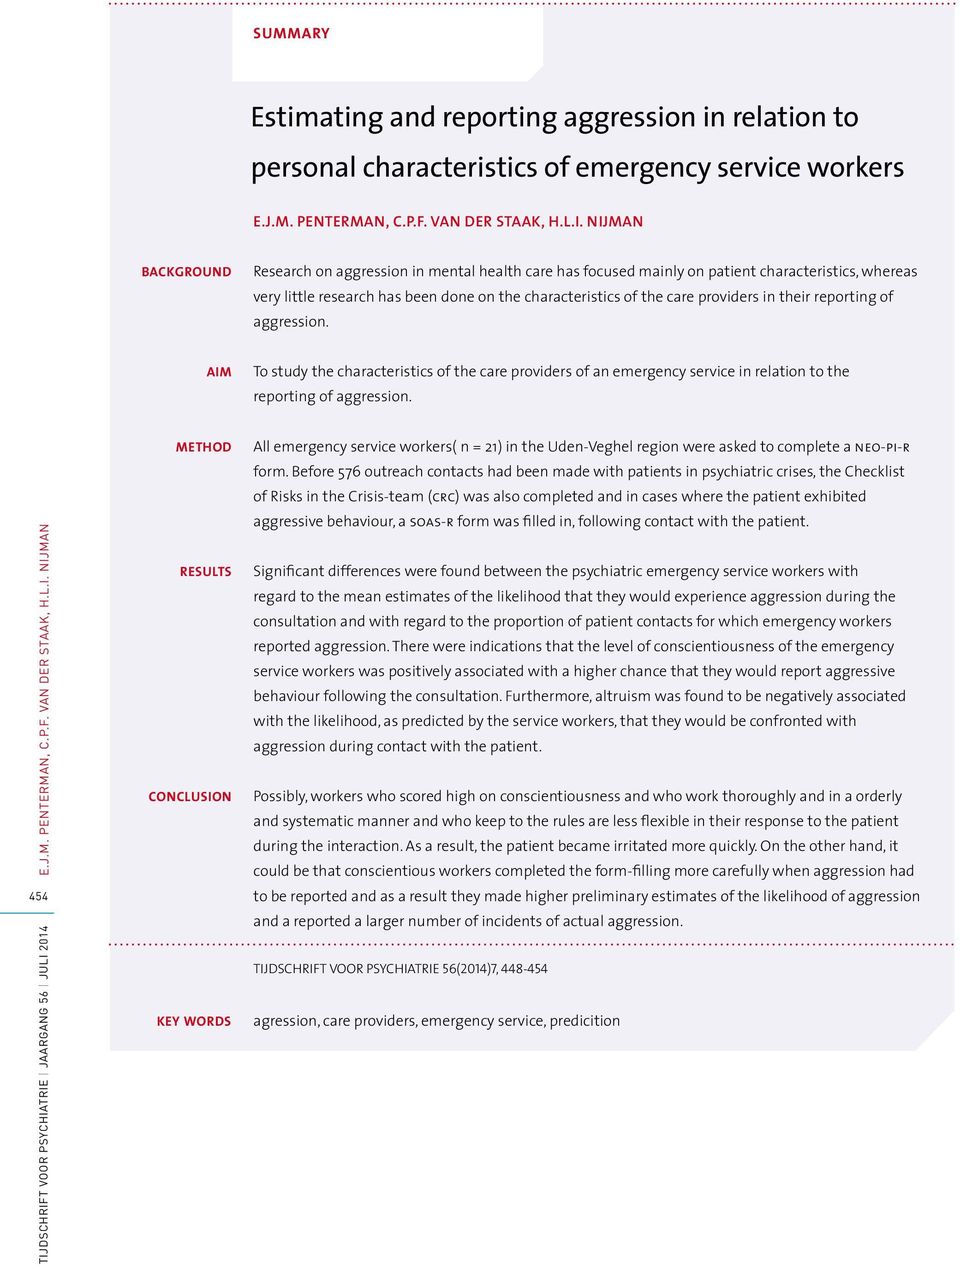 in their reporting of aggression. AIM To study the characteristics of the care providers of an emergency service in relation to the reporting of aggression. E.J.M. PENTERMAN, C.P.F. VAN DER STAAK, H.